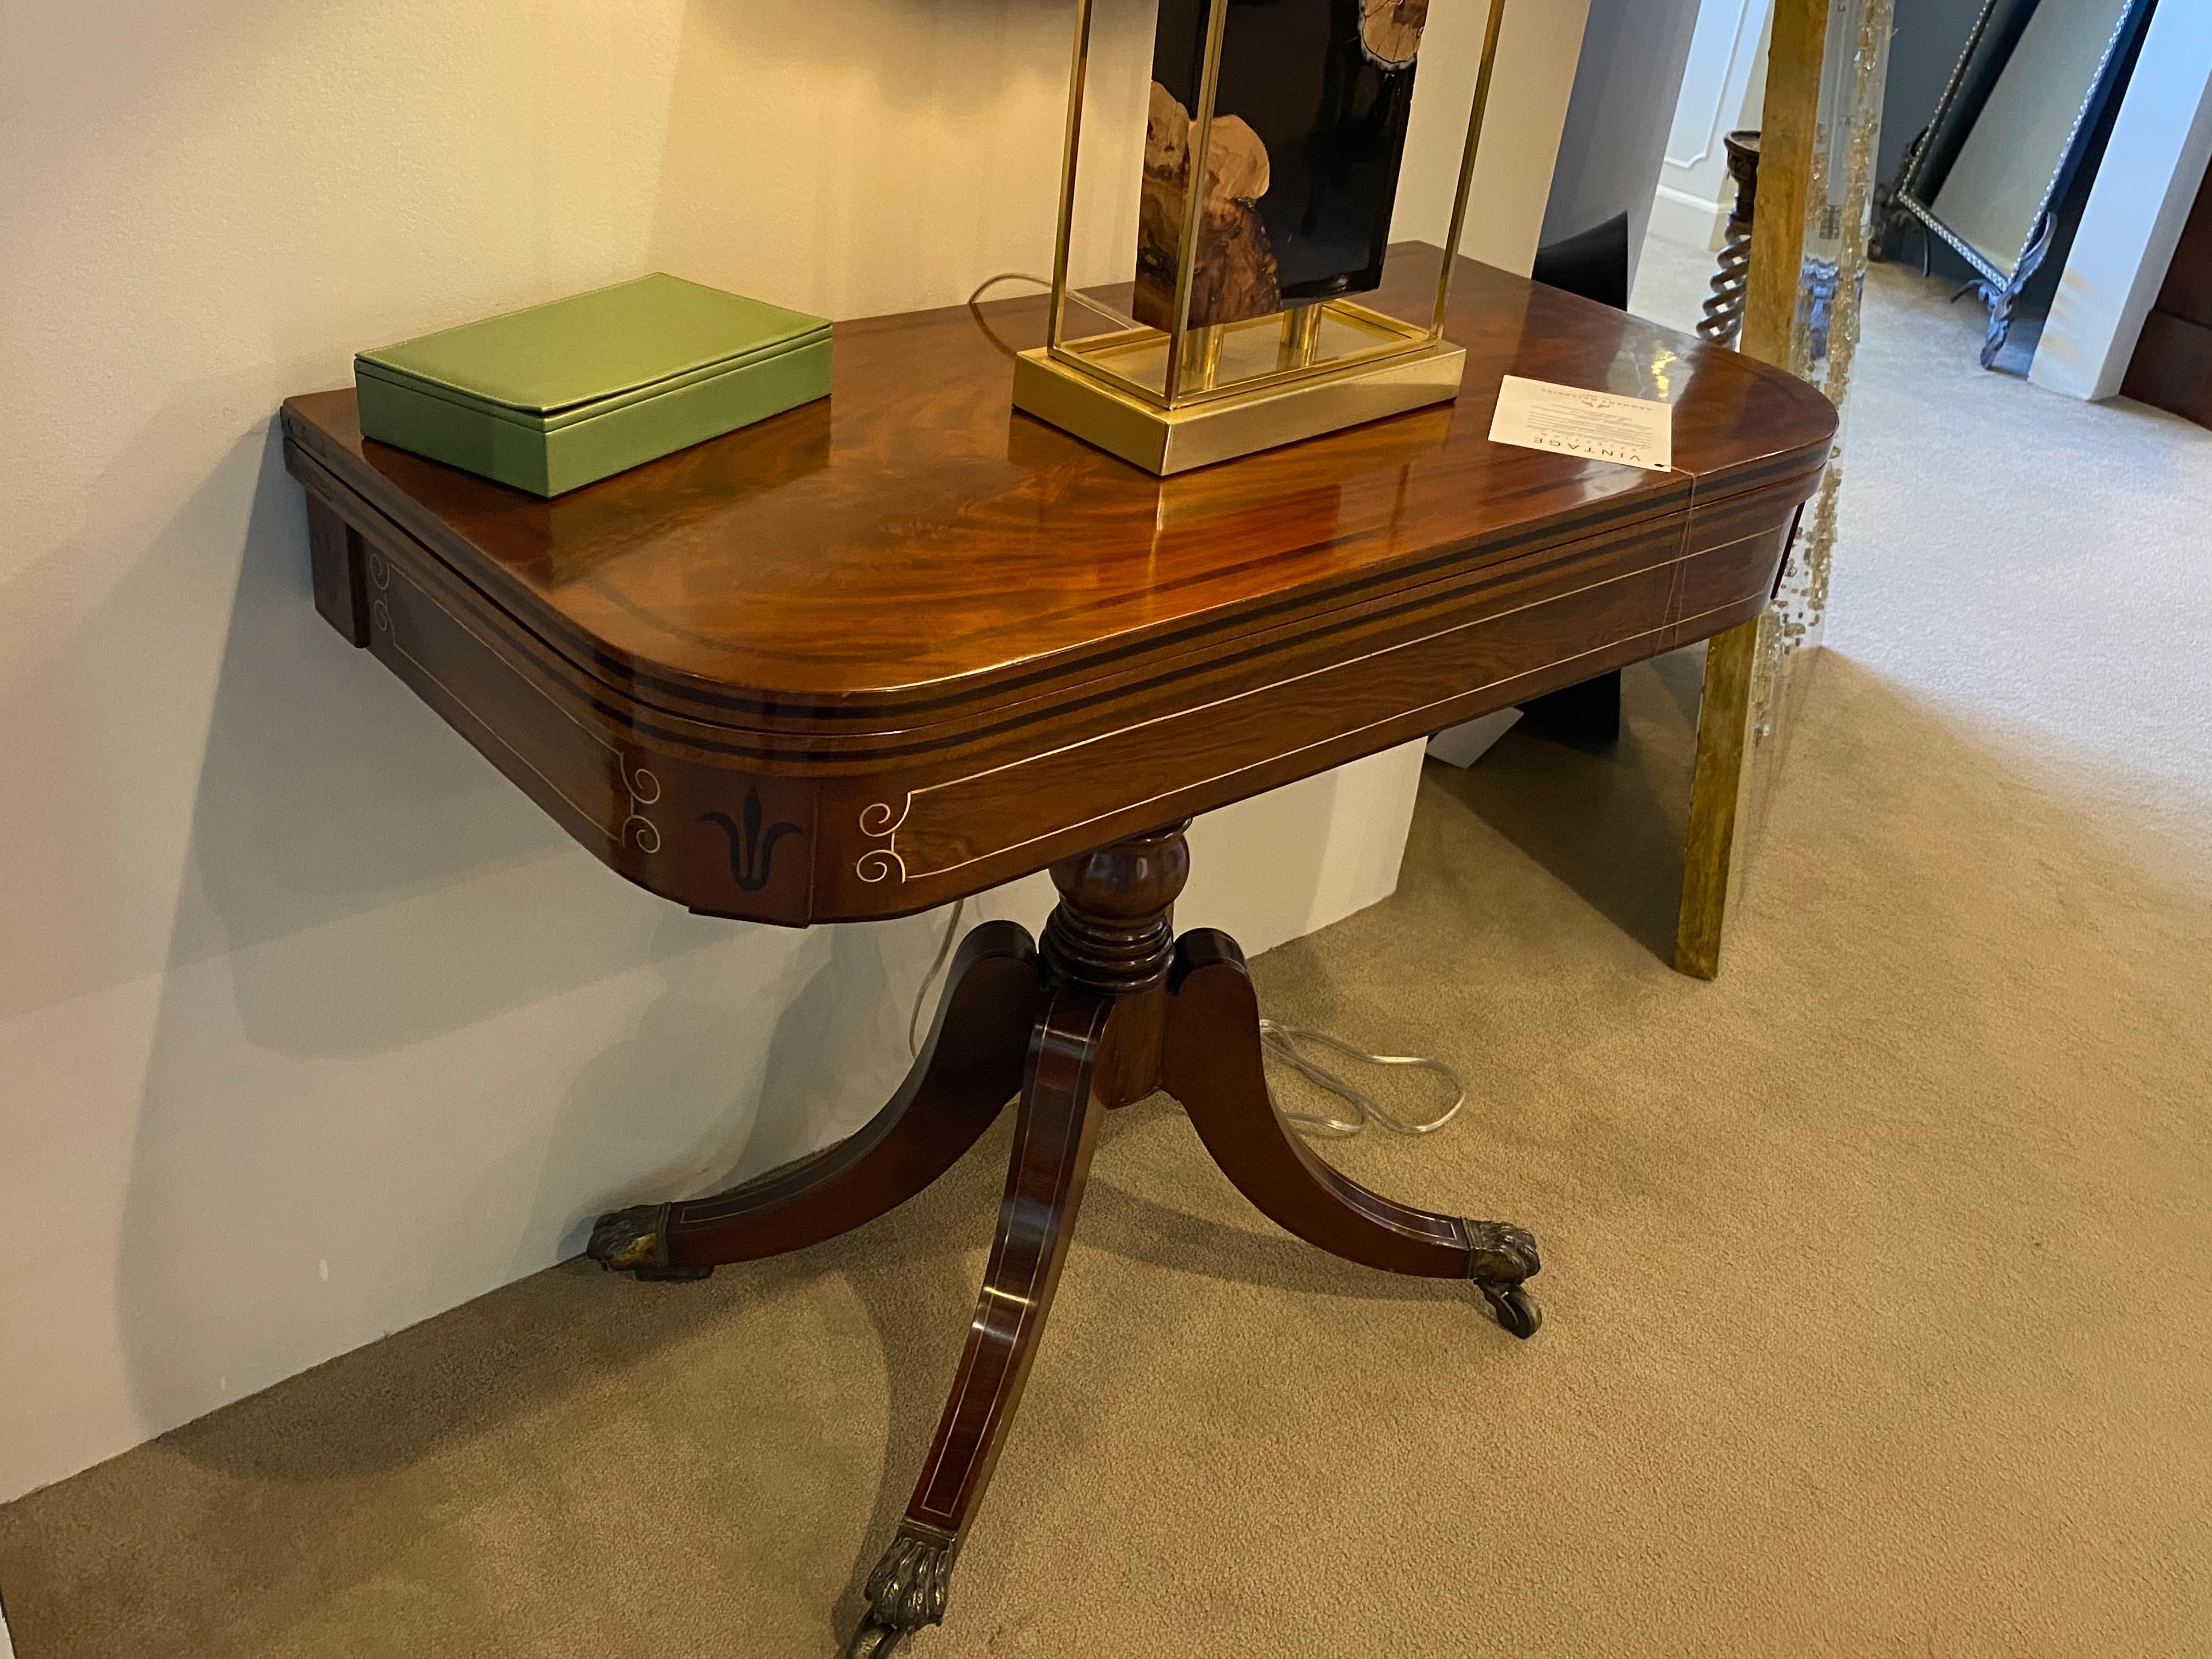 A lovely grained 19th century mahogany and rosewood games table with brass inlay on the apron and the legs. Solid brass toe caps and casters. This fold over games table is an excellent piece as a console in an entrance or hall. It has good color and